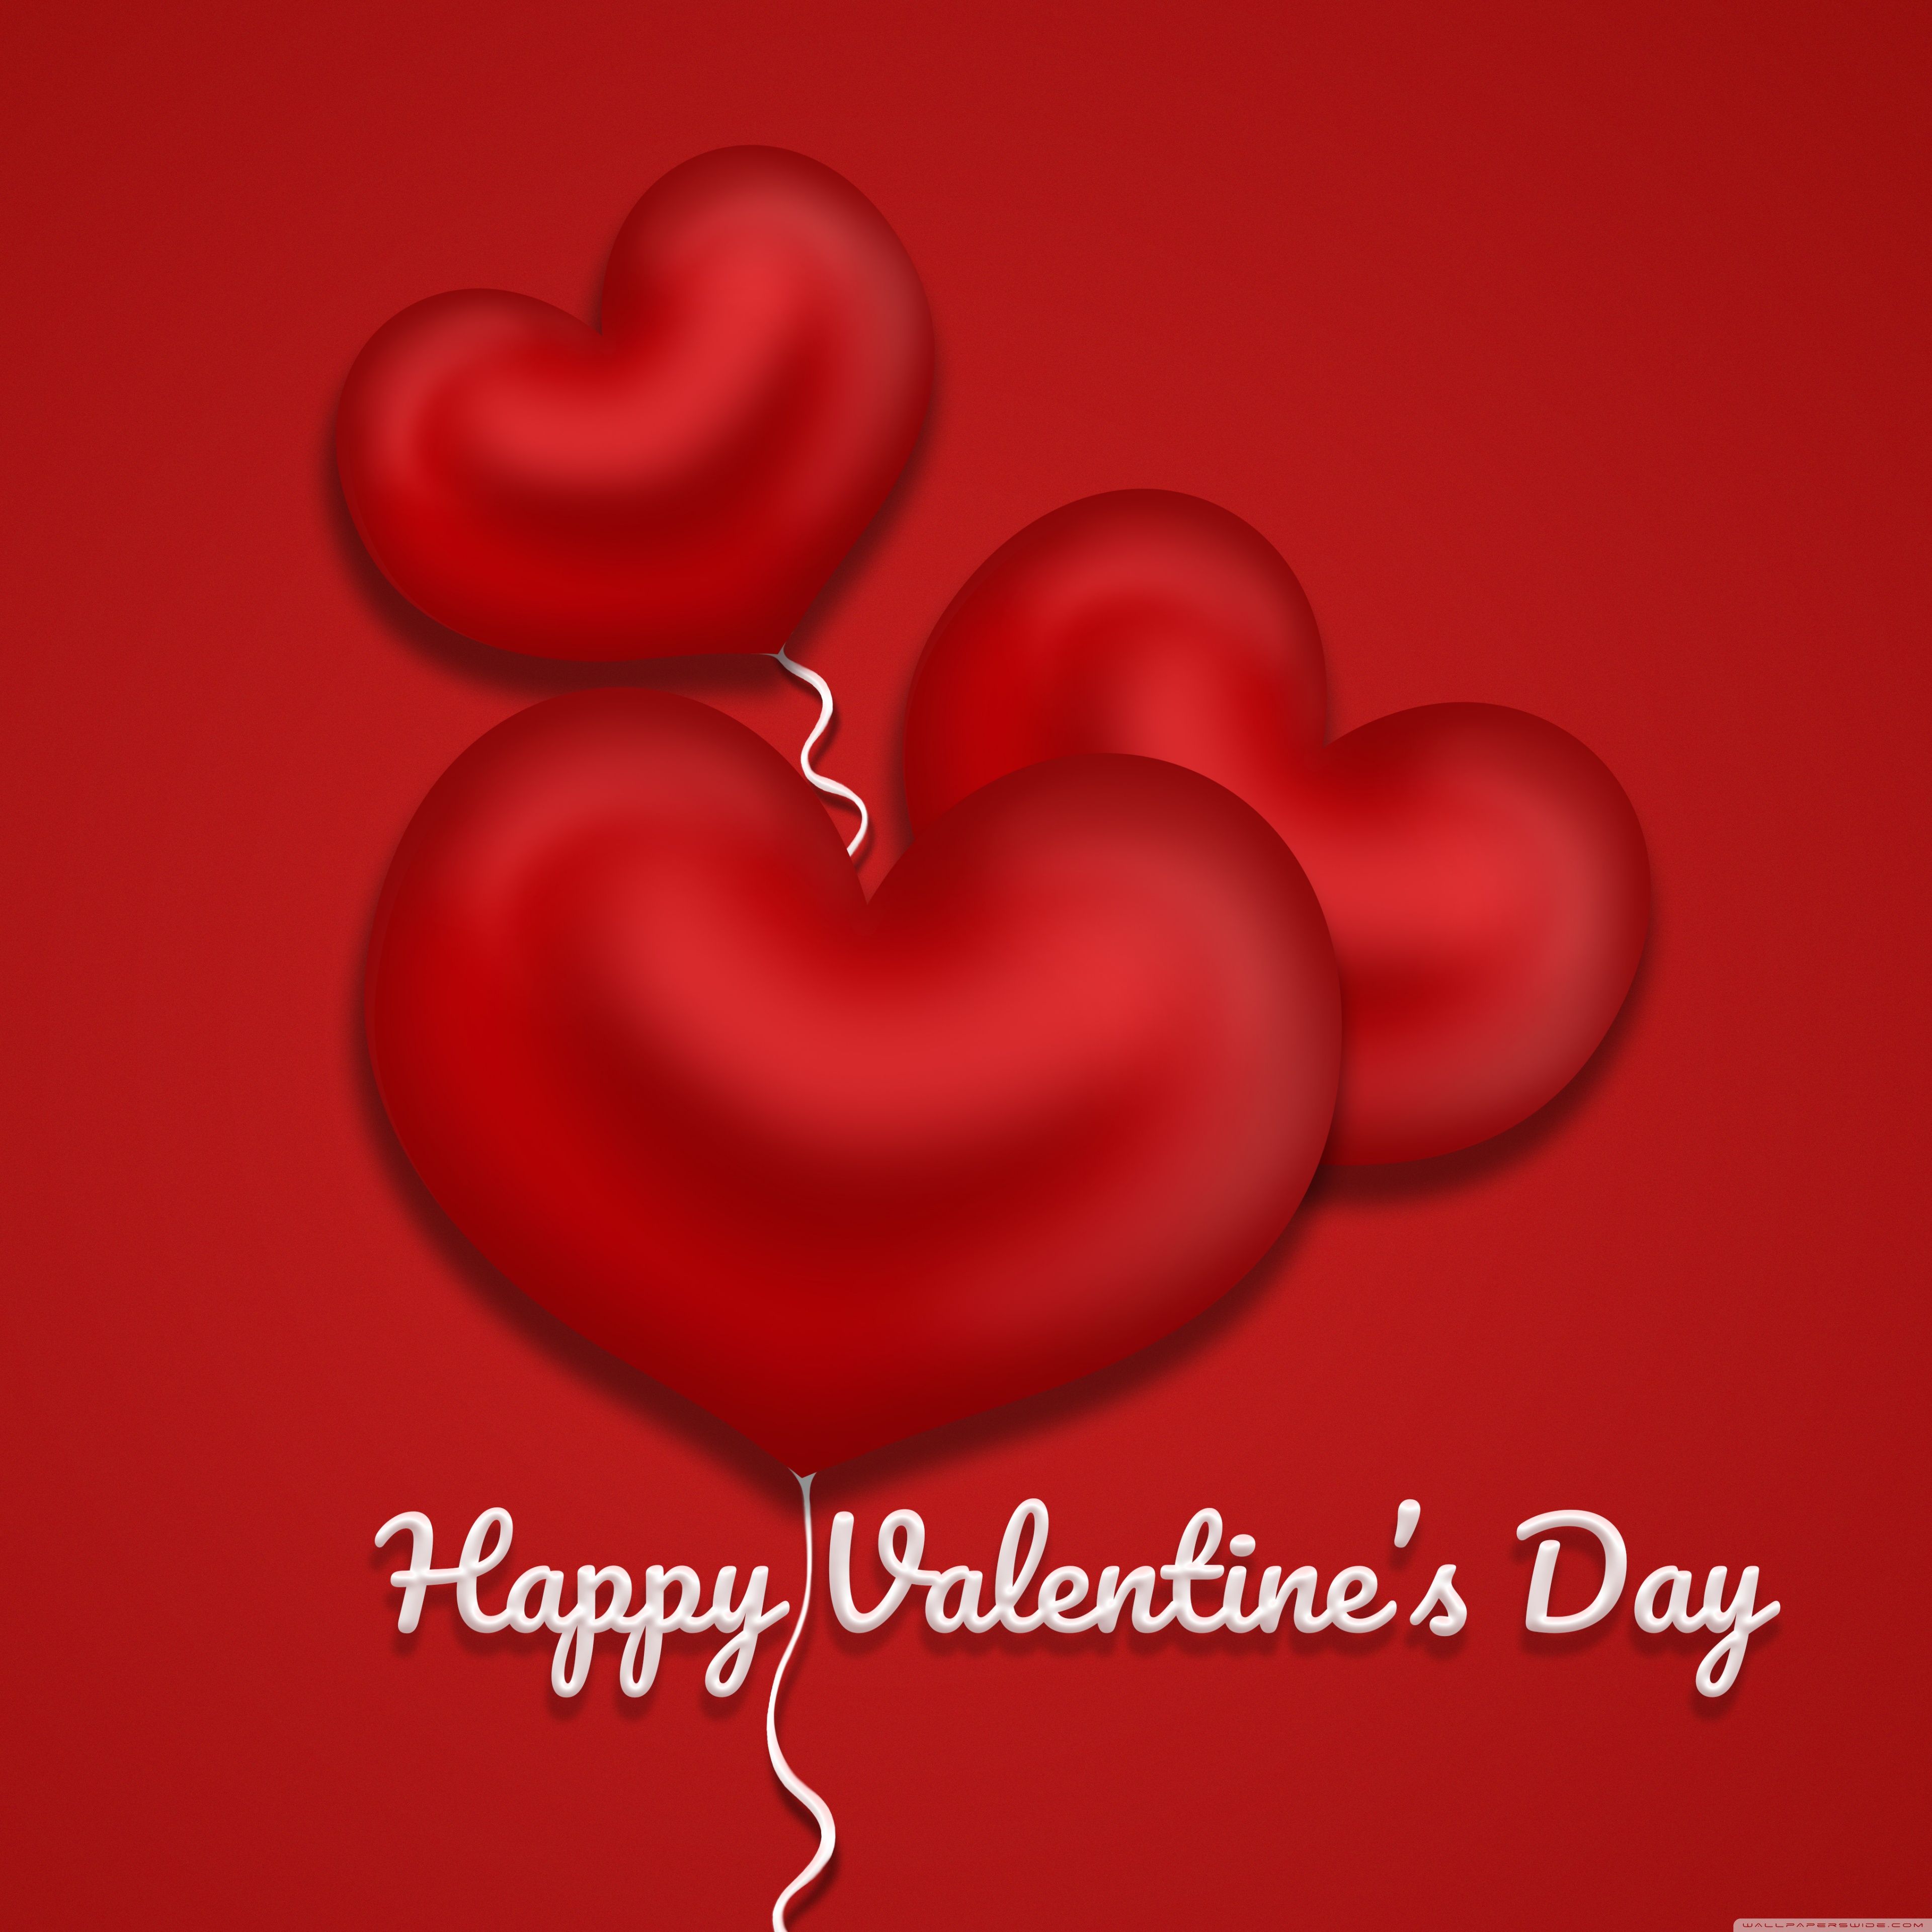 Happy Valentines Day 2020 Ultra HD .wallpaperwide.com